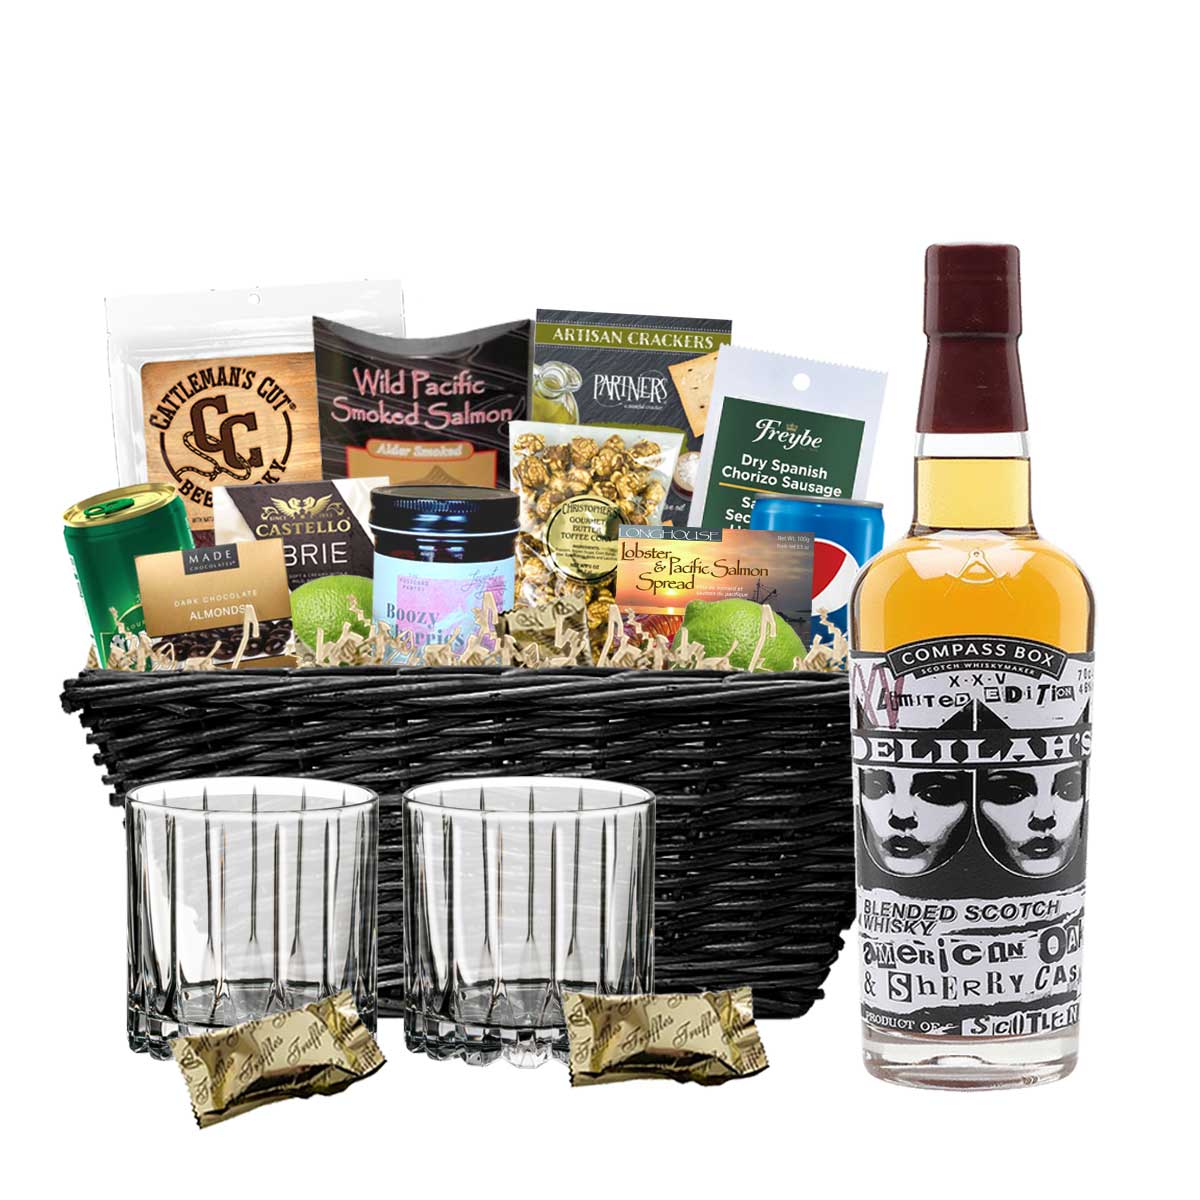 TAG Liquor Stores BC - Compass Box Delilah's XXV Blended Scotch Whisky 750ml Gift Basket